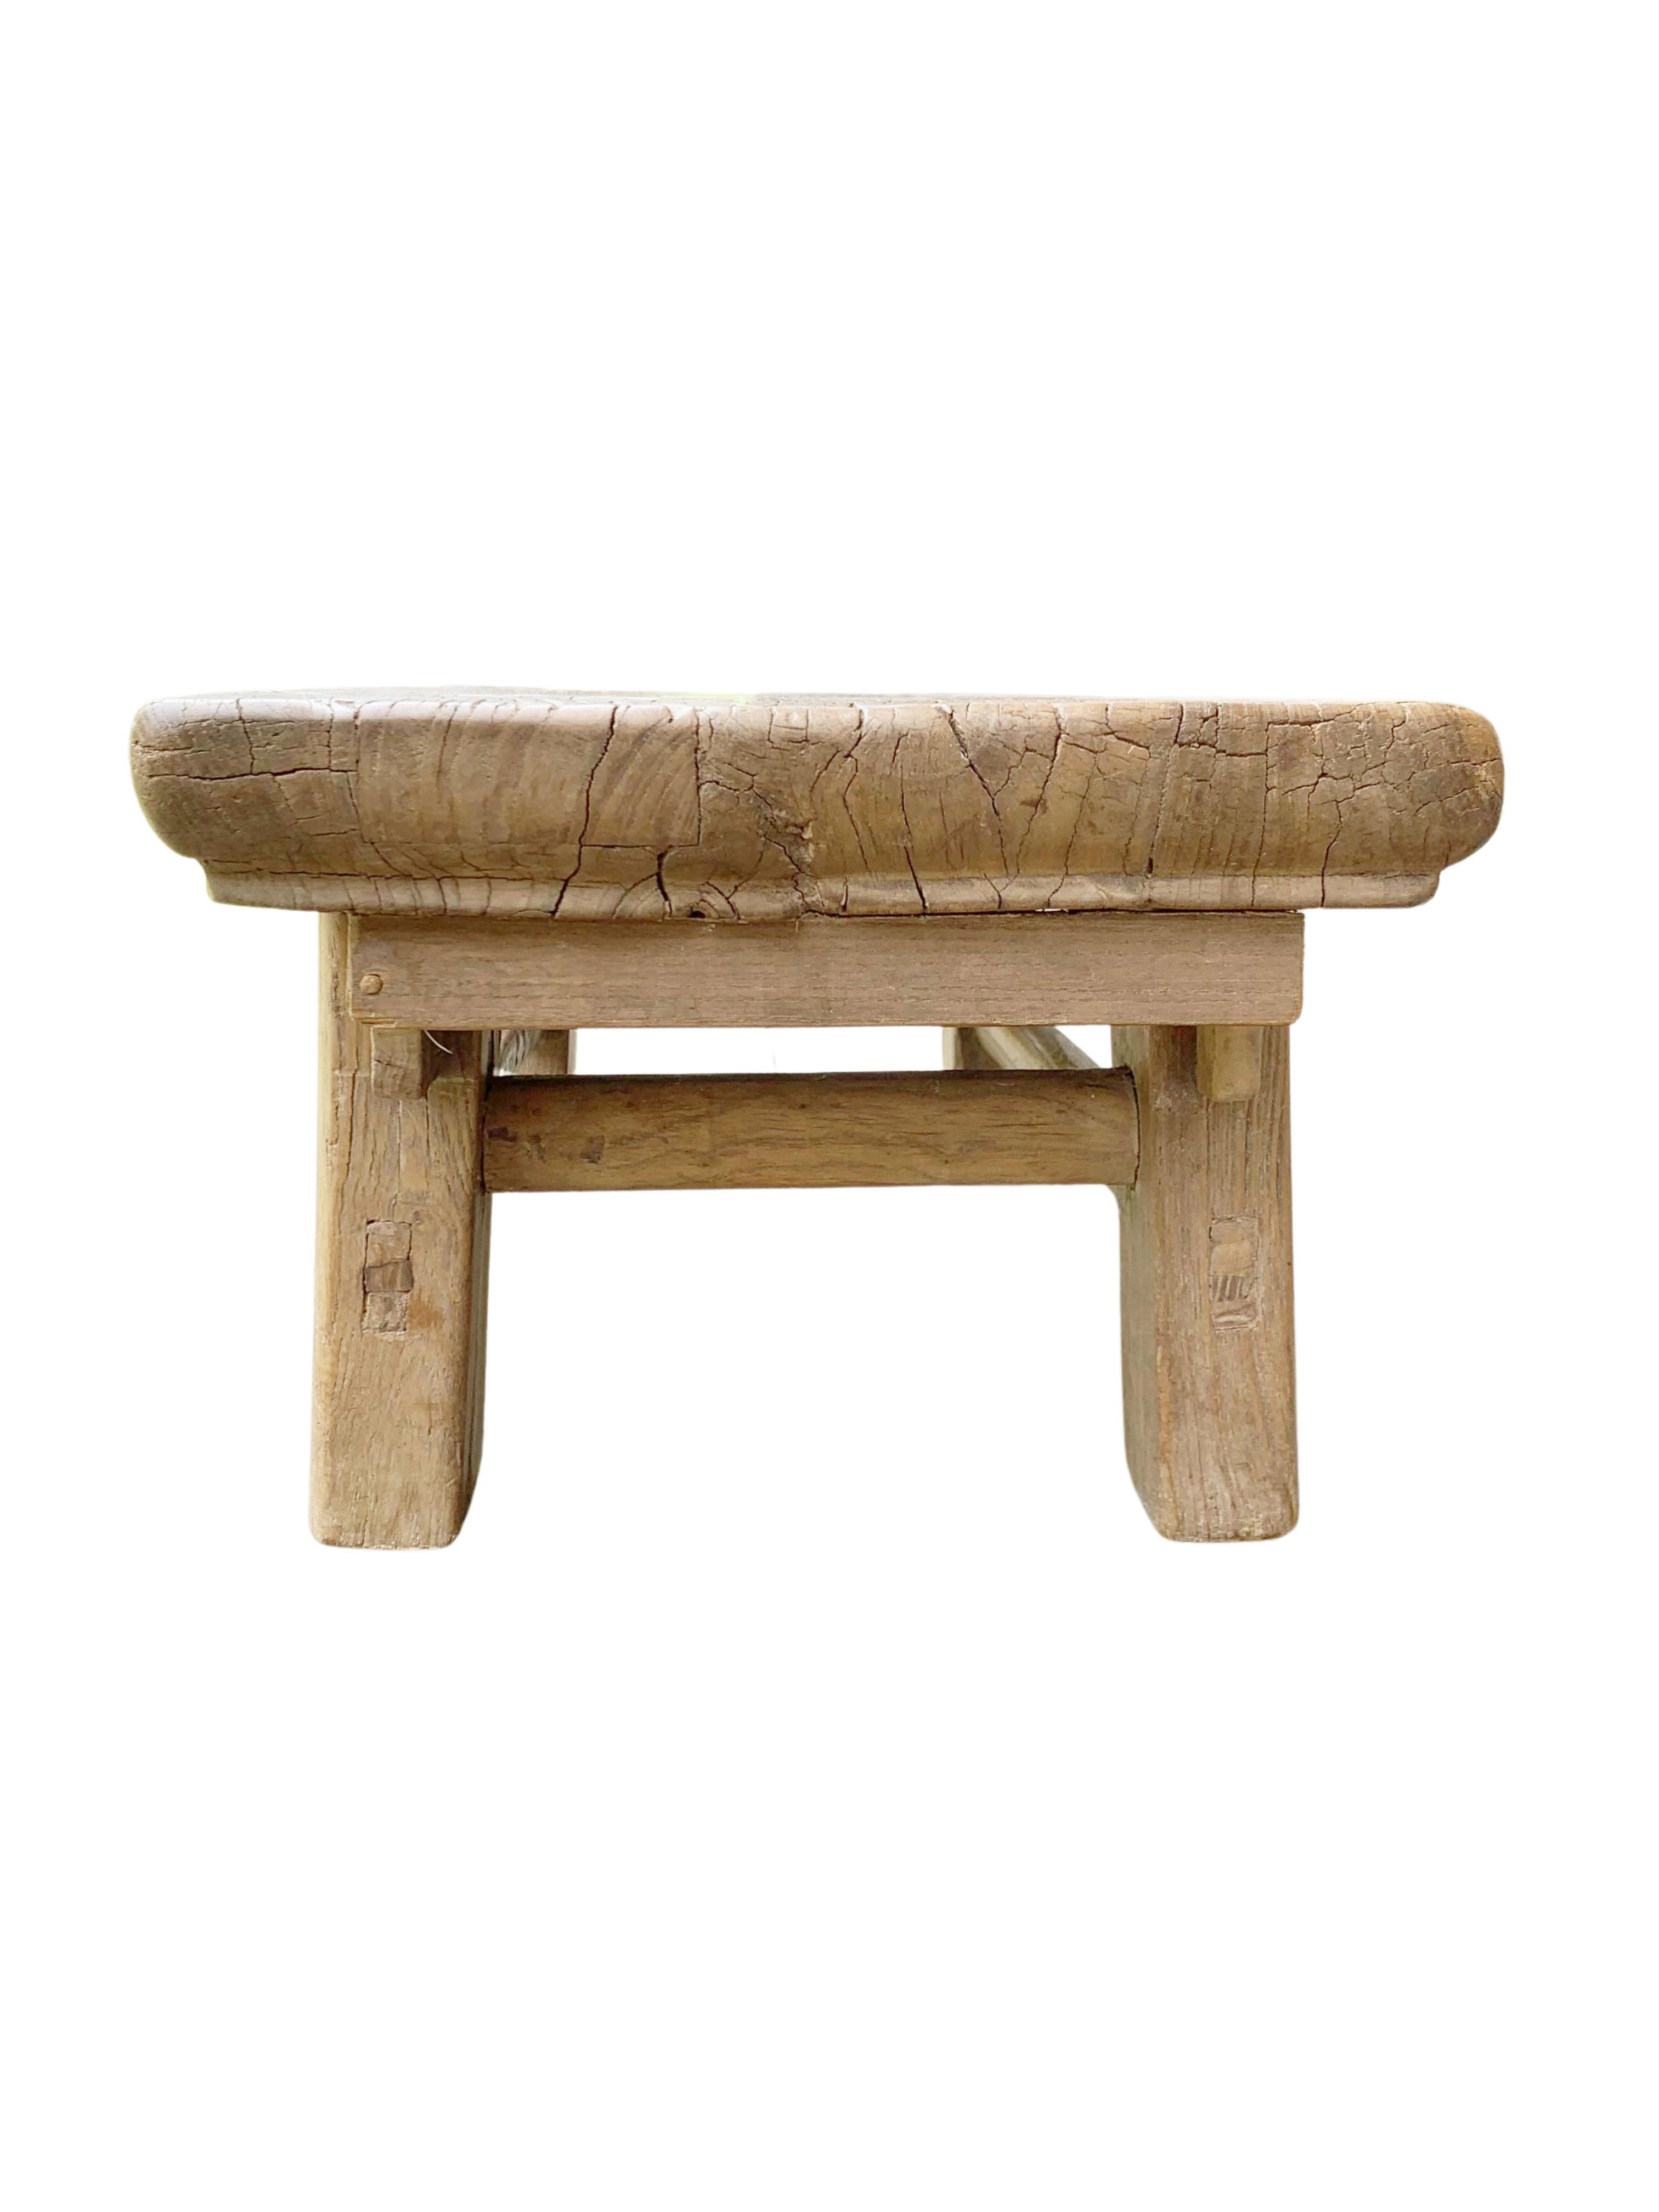 This antique elm wood low stool comes from China's Hubei province. It was crafted using only wooden joints. The elm wood has aged beautifully over its more than 100 years of life. 

Dimensions: height 23 cm x width 68 cm x depth 30 cm.
 